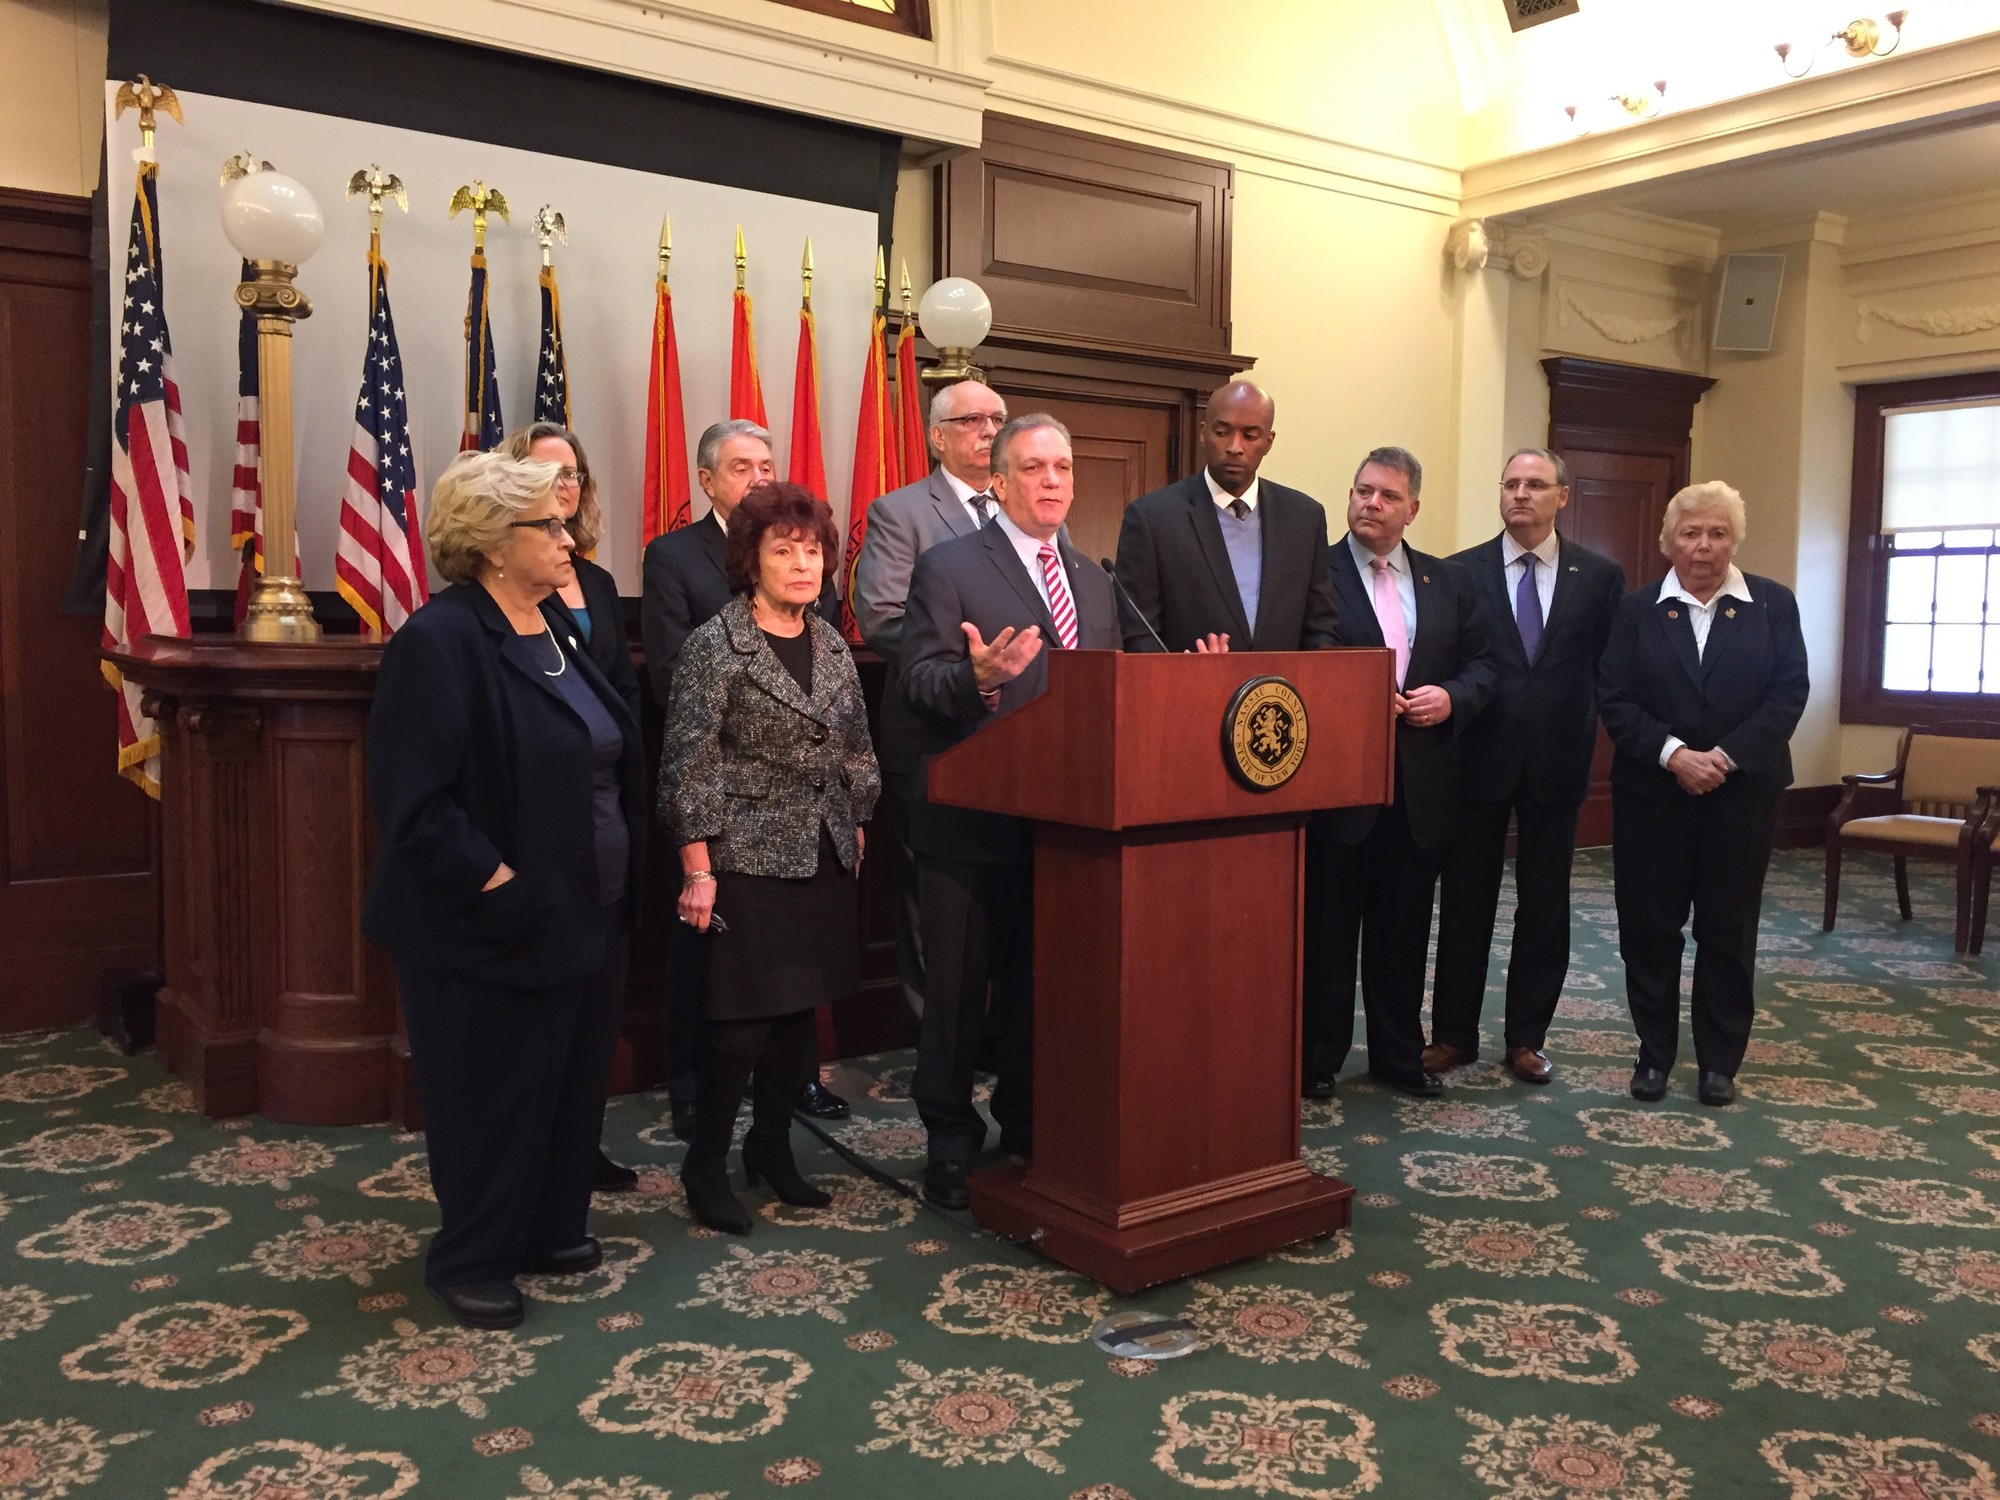 County Executive Ed Mangano announced at a press conference on Feb. 10 that Nassau leaders had designated an additional $3 million for the NICE bus system.